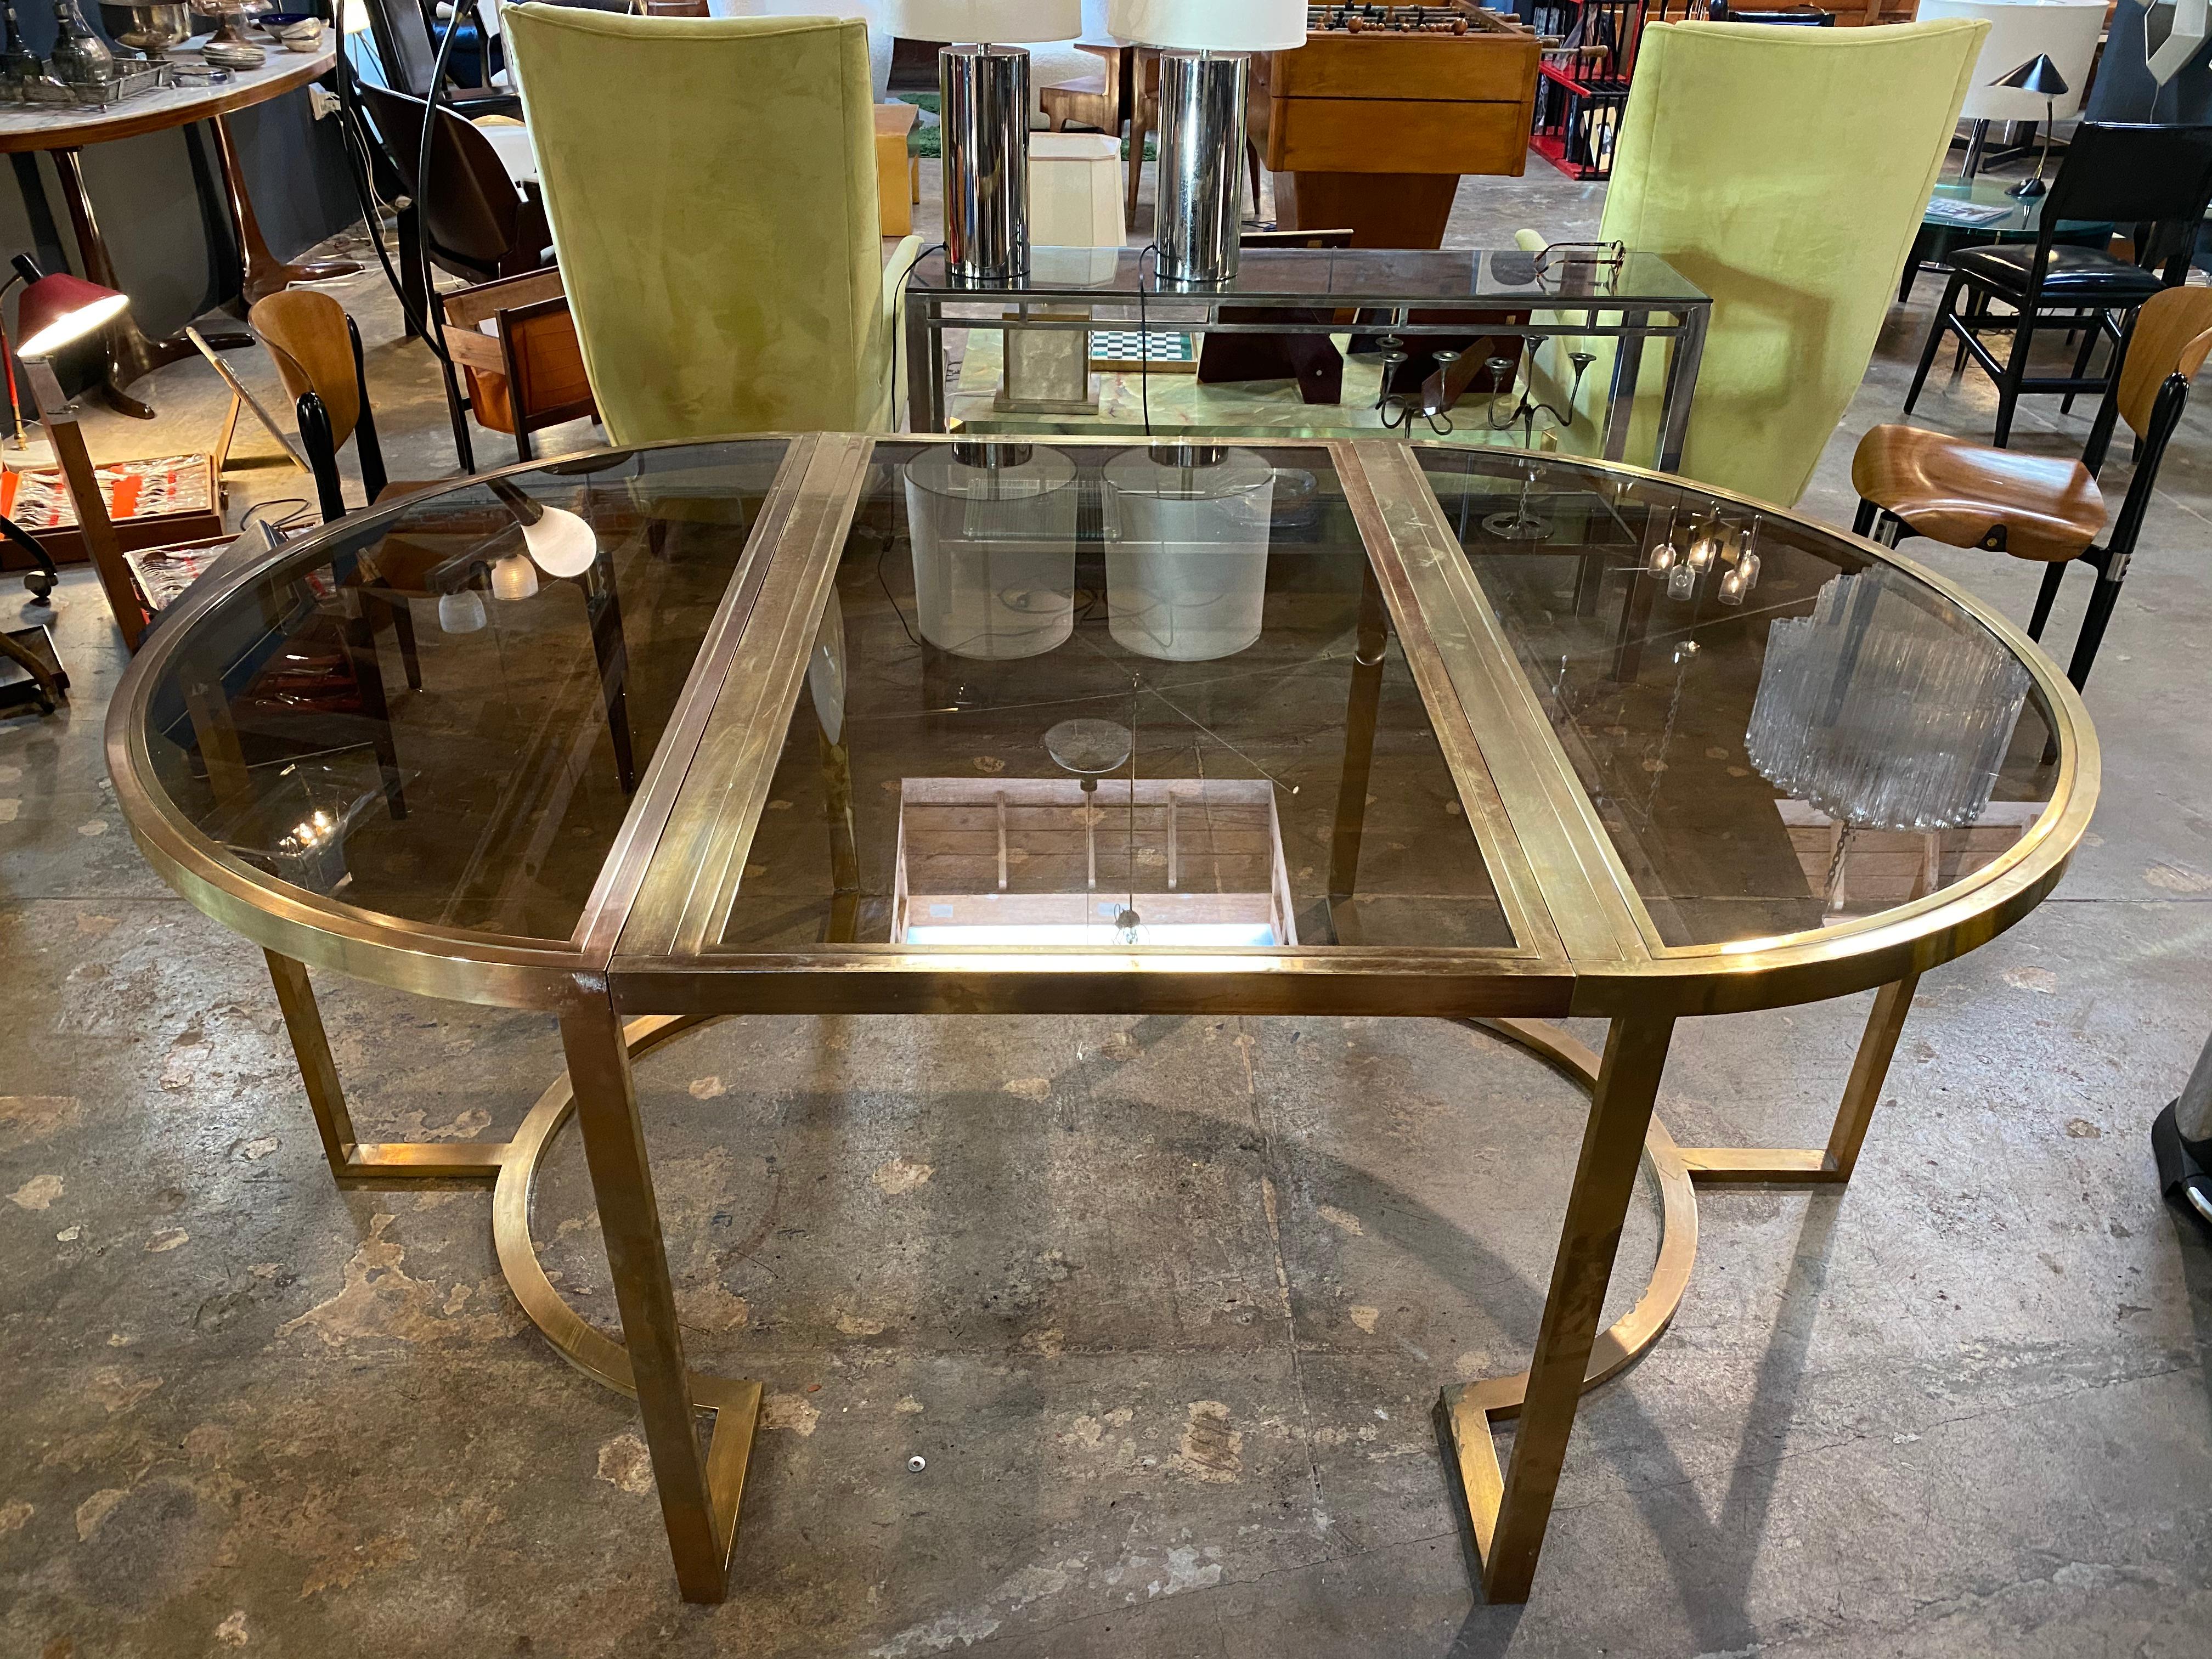 It's a table. It's a console. It's a table. It is whatever you want it to be, a great Italian design.

Measures: Diameter 50